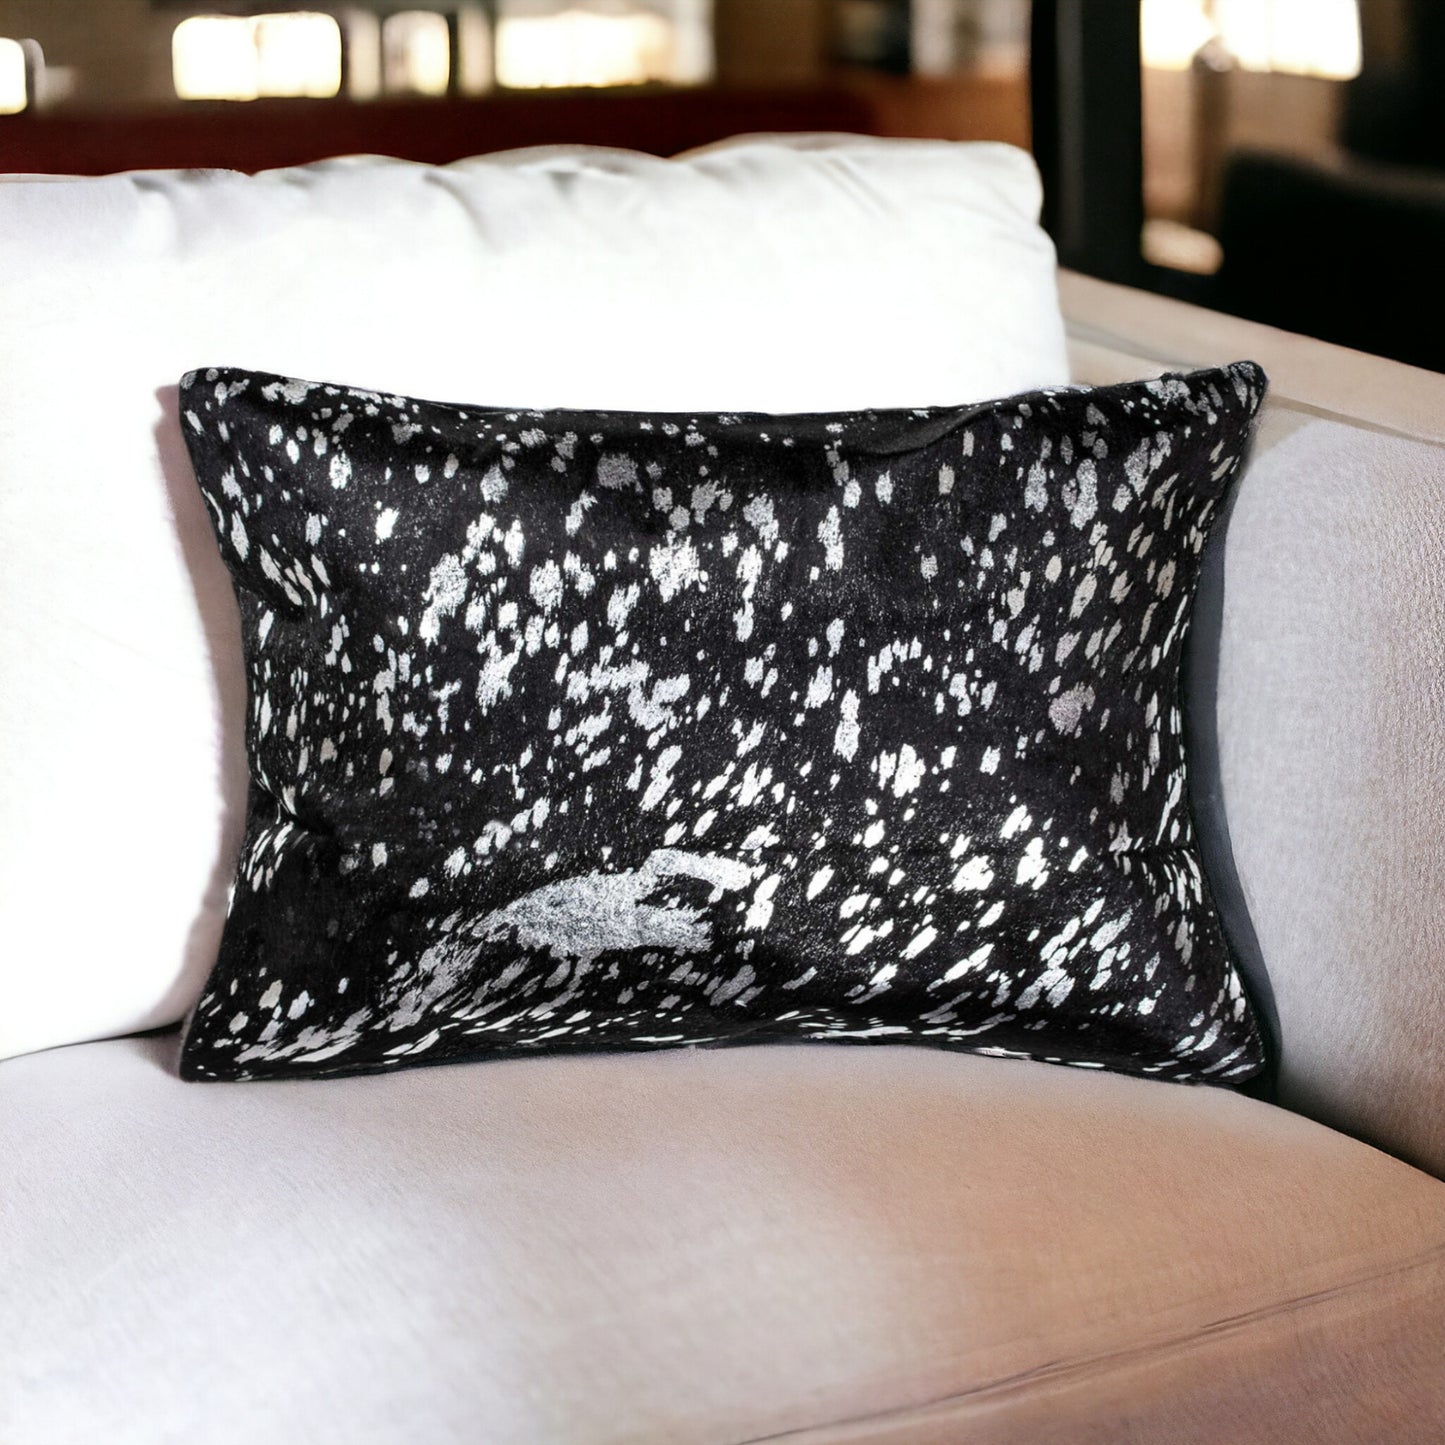 12" X 20" Black and Silver Cowhide Throw Pillow